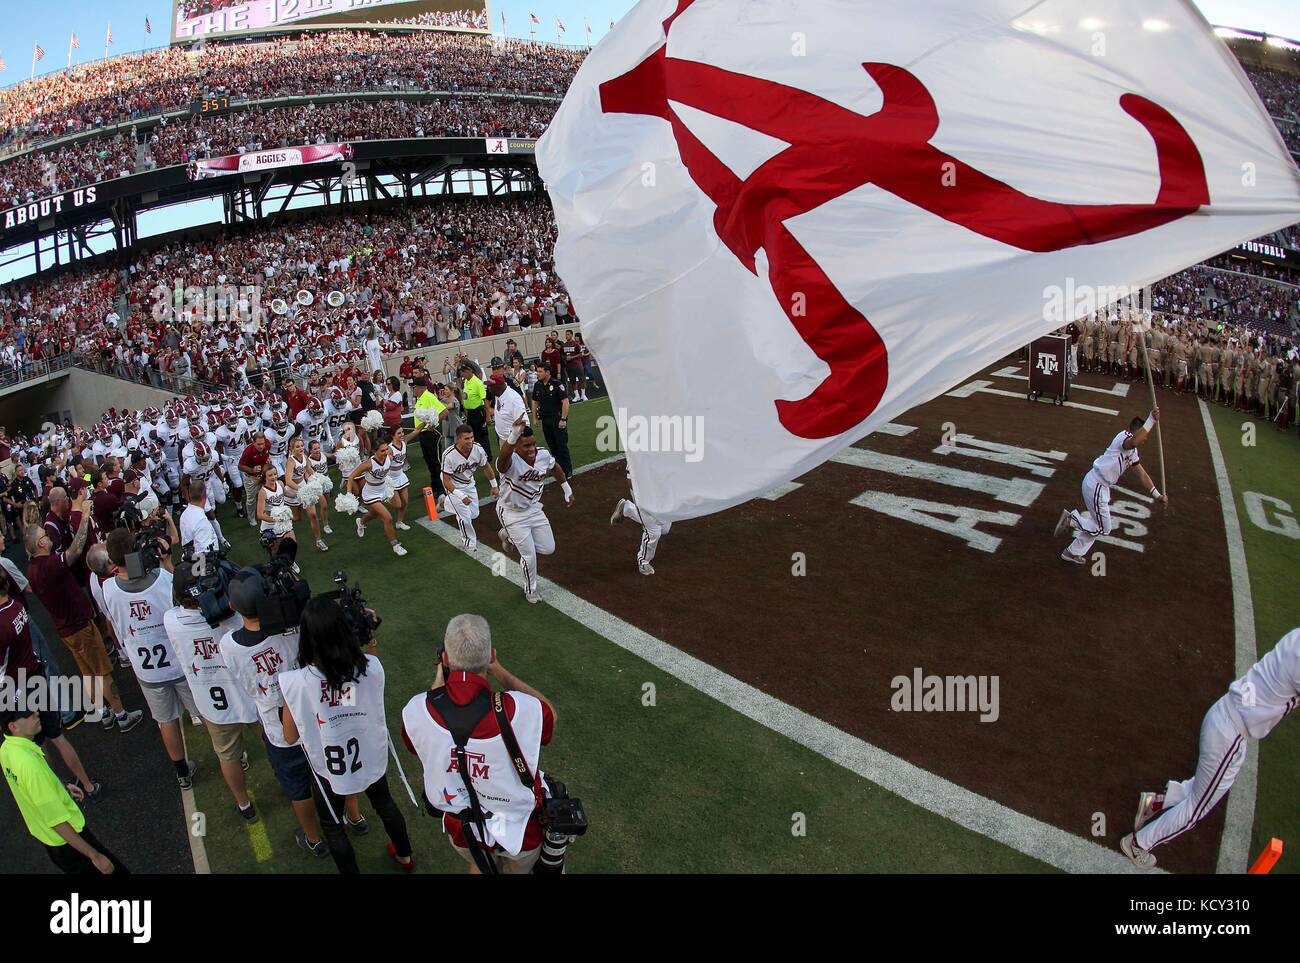 October 6, 2017: The Alabama Crimson Tide take the field at the start of the NCAA football game between the Alabama Crimson Tide and the Texas A&M Aggies at Kyle Field in College Station, TX; John Glaser/CSM. Stock Photo